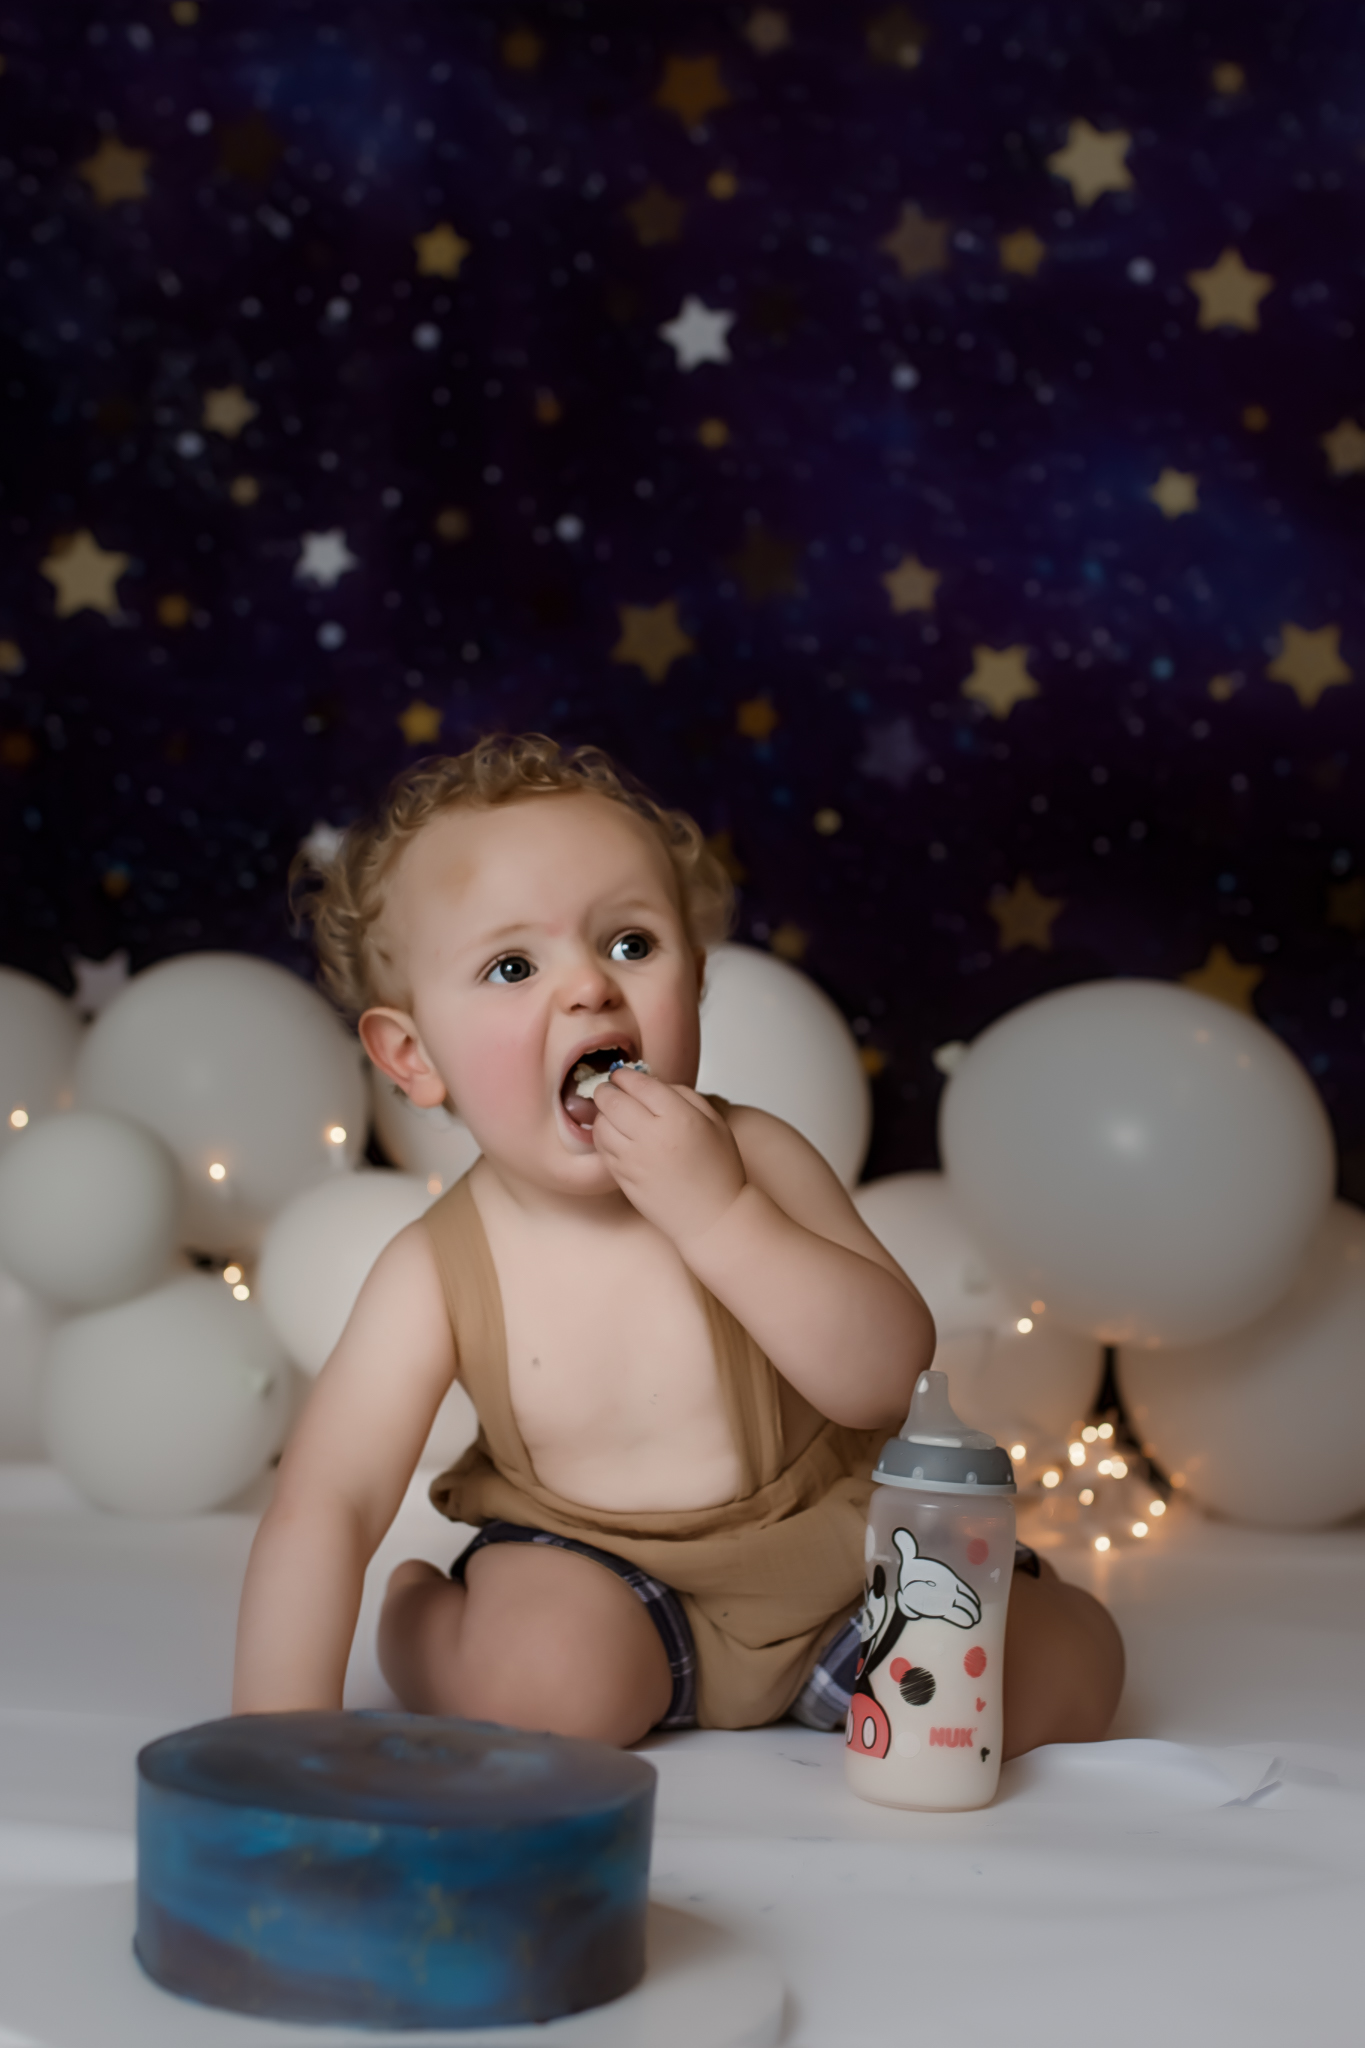 Cake Smash Photography - 18 month photo shoot with stars in the background.